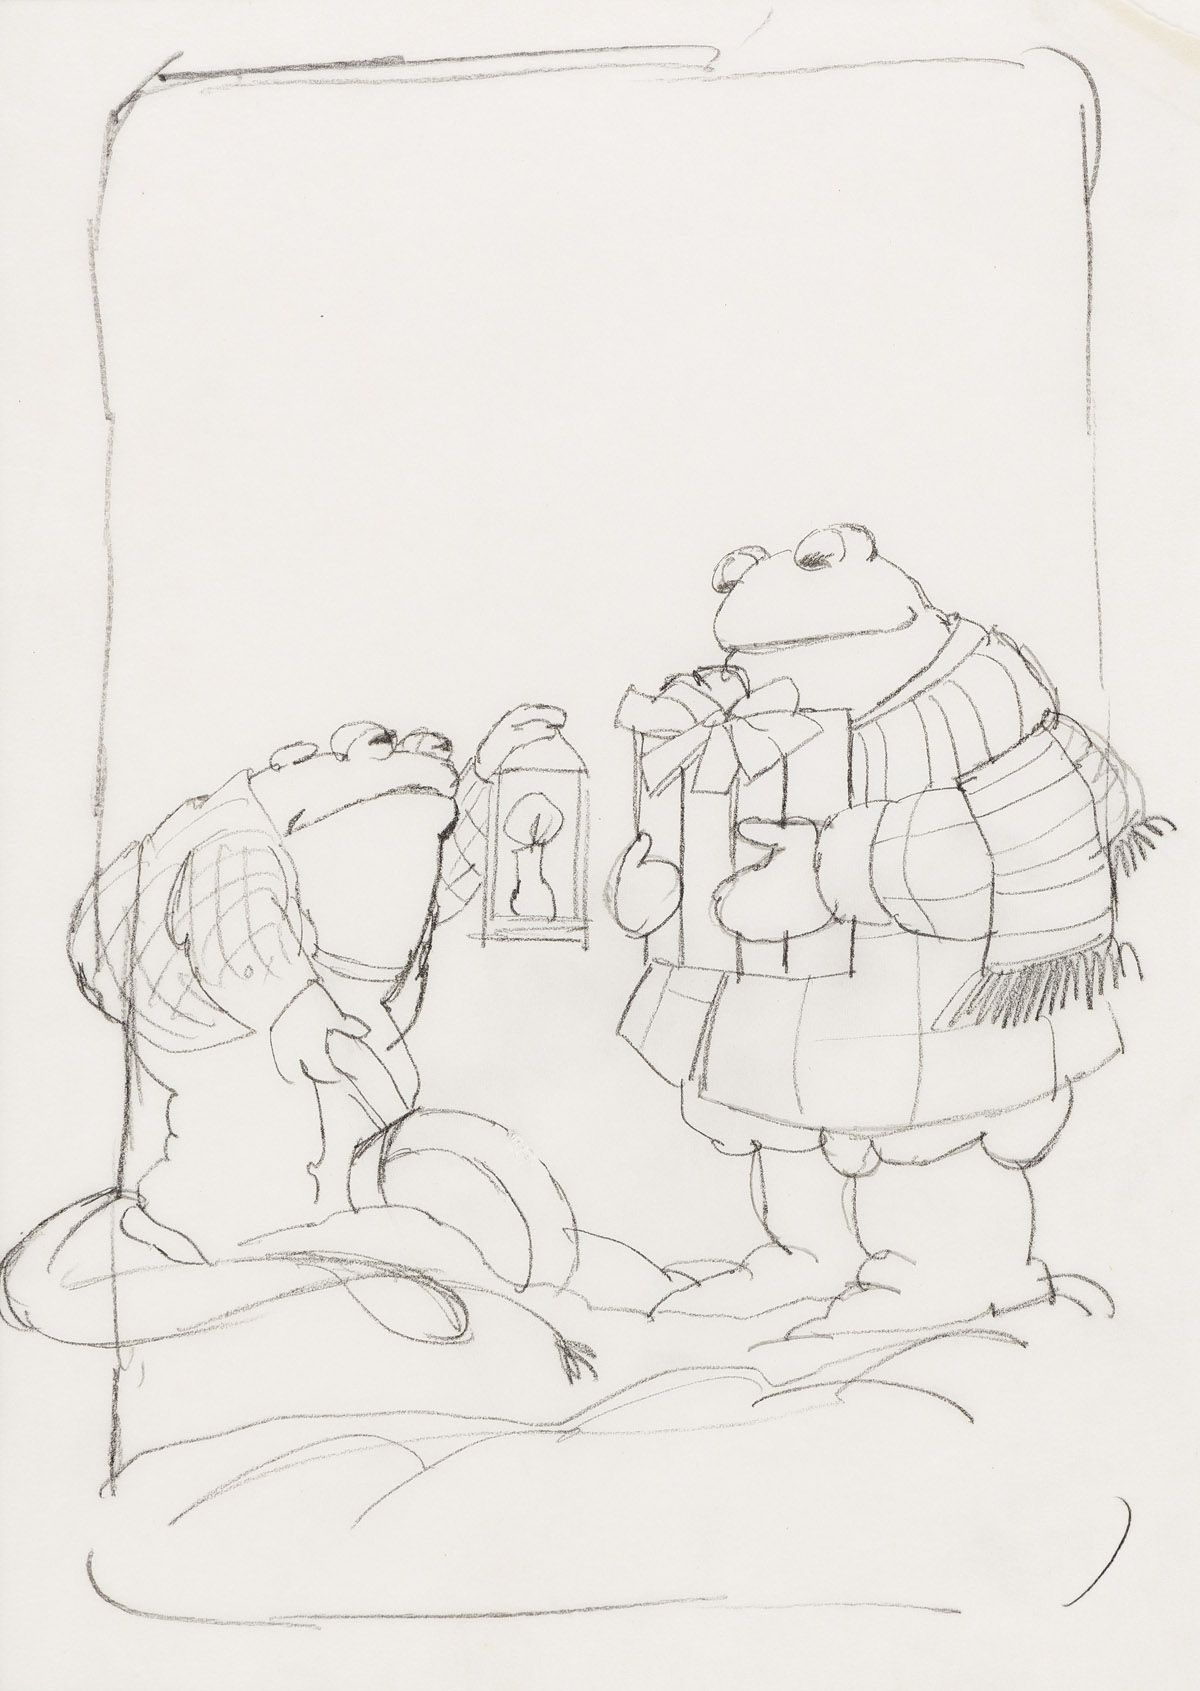 ARNOLD LOBEL (1933-1987) Frog has a gift for Toad. [CHILDRENS / GAY ARTIST]